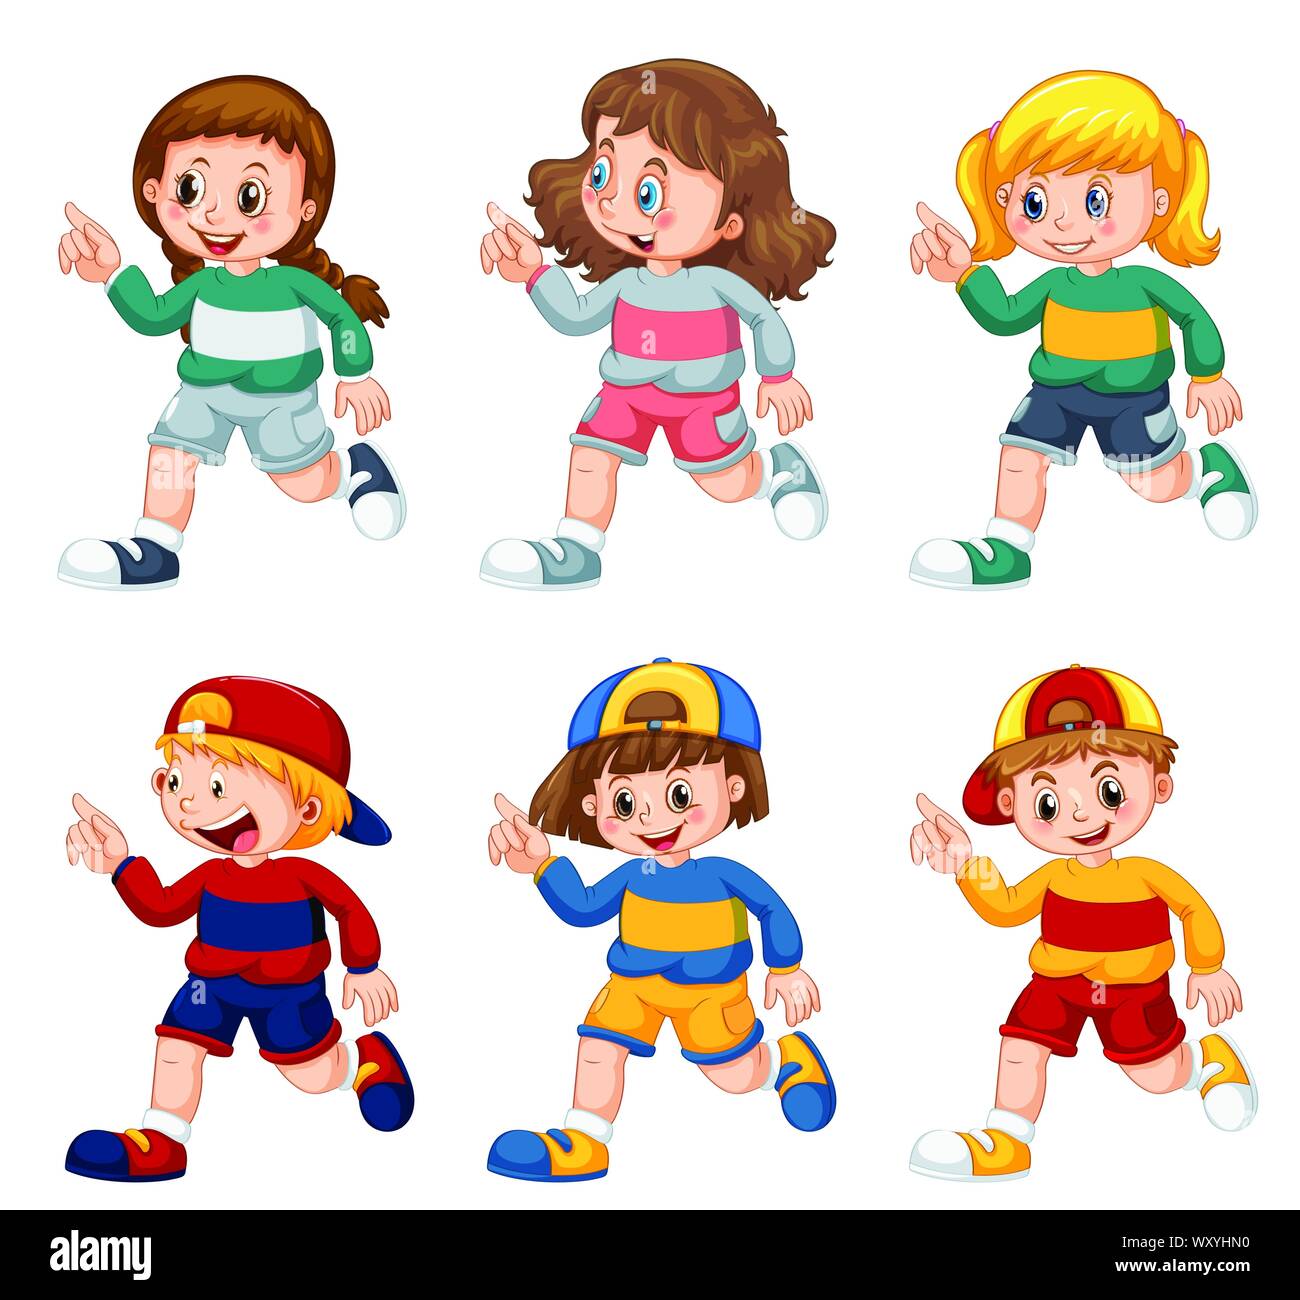 Set of isolated boys and girls illustration Stock Vector